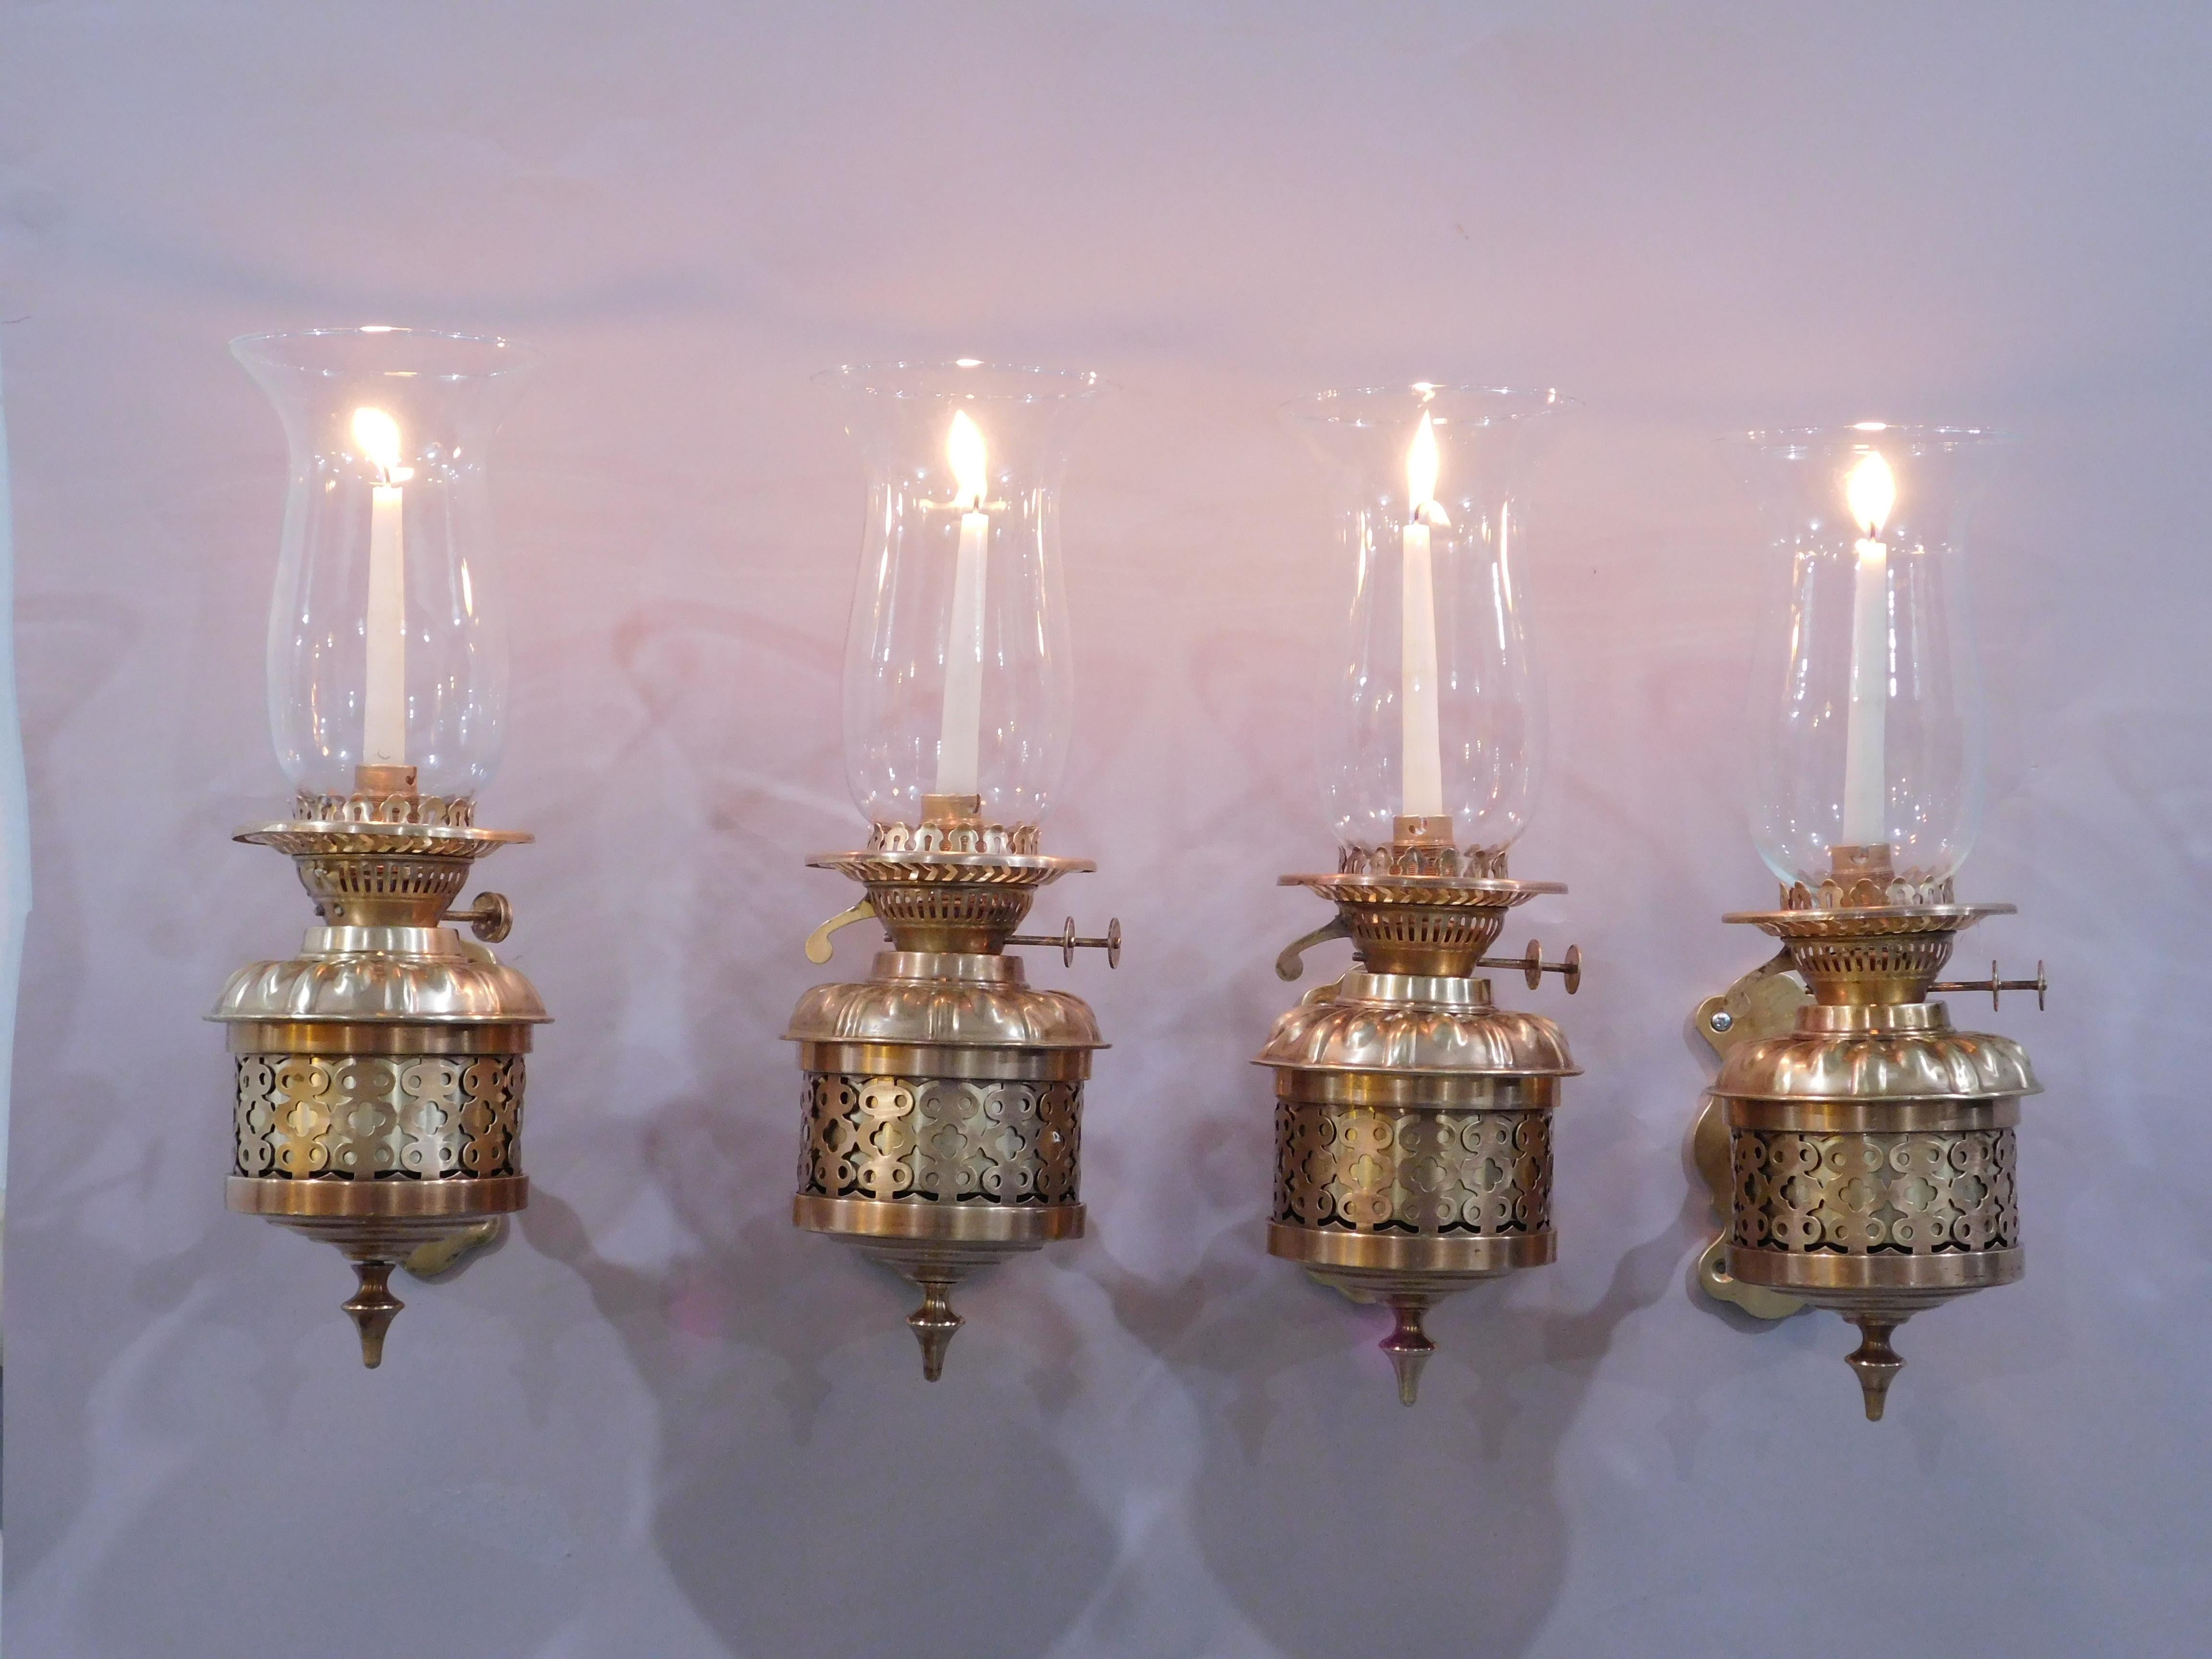 Unique set of 4 English Brass and Bronze Candle Hurricane Lantern Sconces. Hand hammered brass repoussé wall lamps, circular brass oil font body with pierced fret quatrefoil, four-leaf clover design which is often found in Gothic architecture